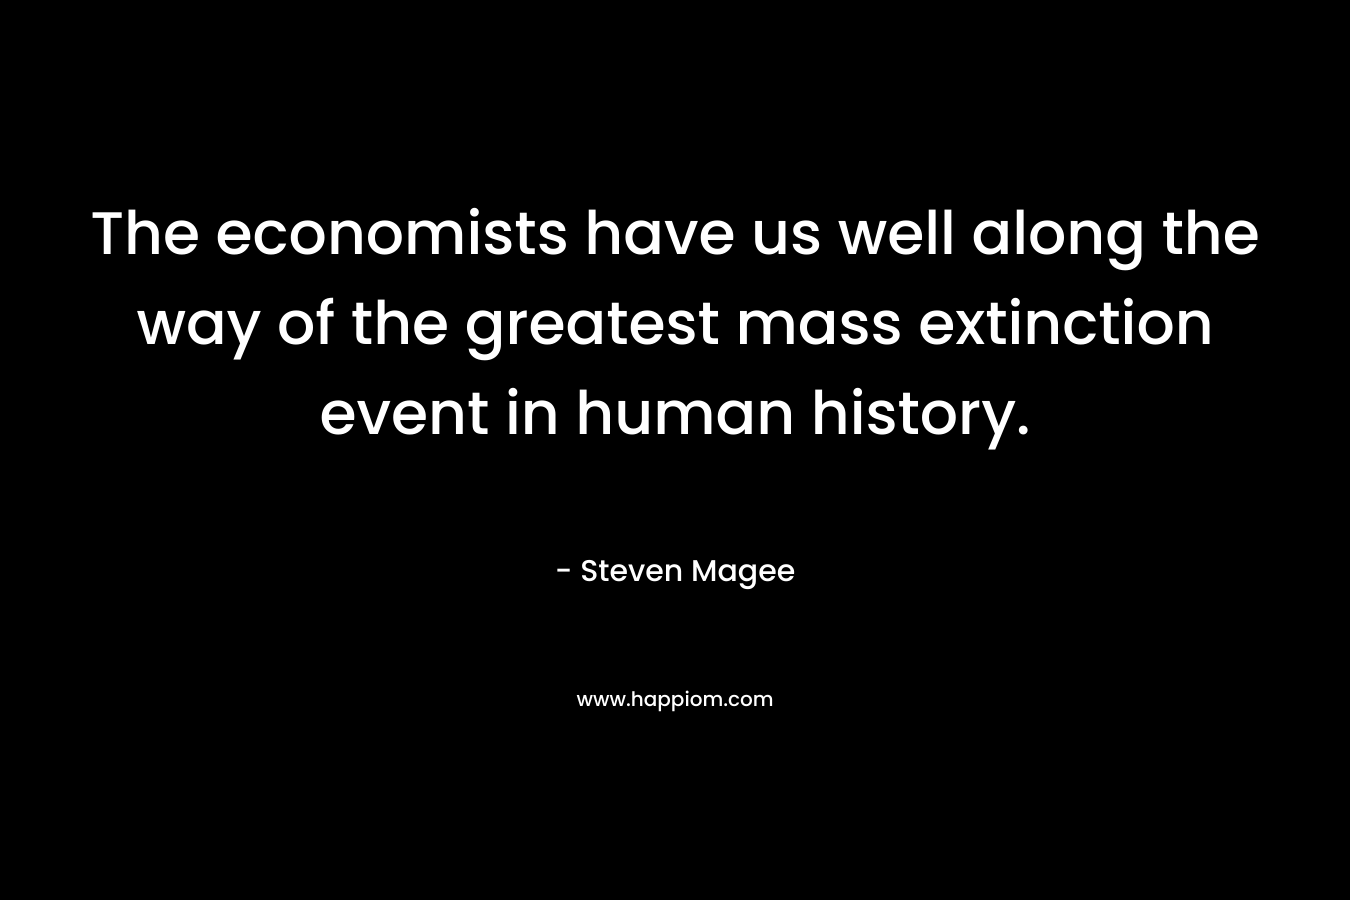 The economists have us well along the way of the greatest mass extinction event in human history. – Steven Magee